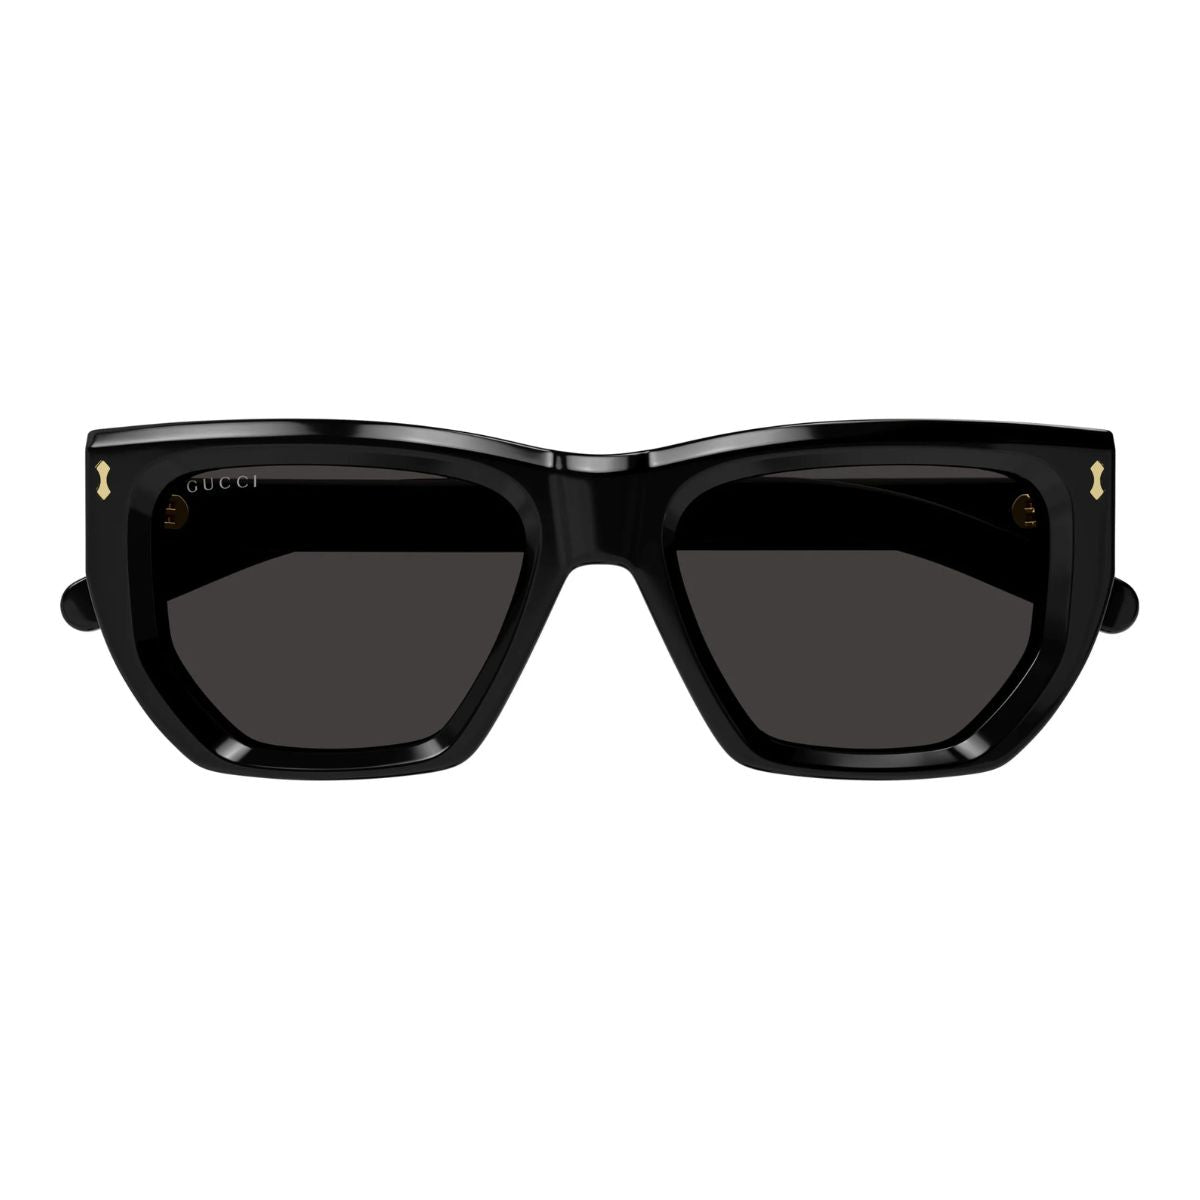 "Trendy Gucci Shades for Women - Model 1520S 001 at Optorium"